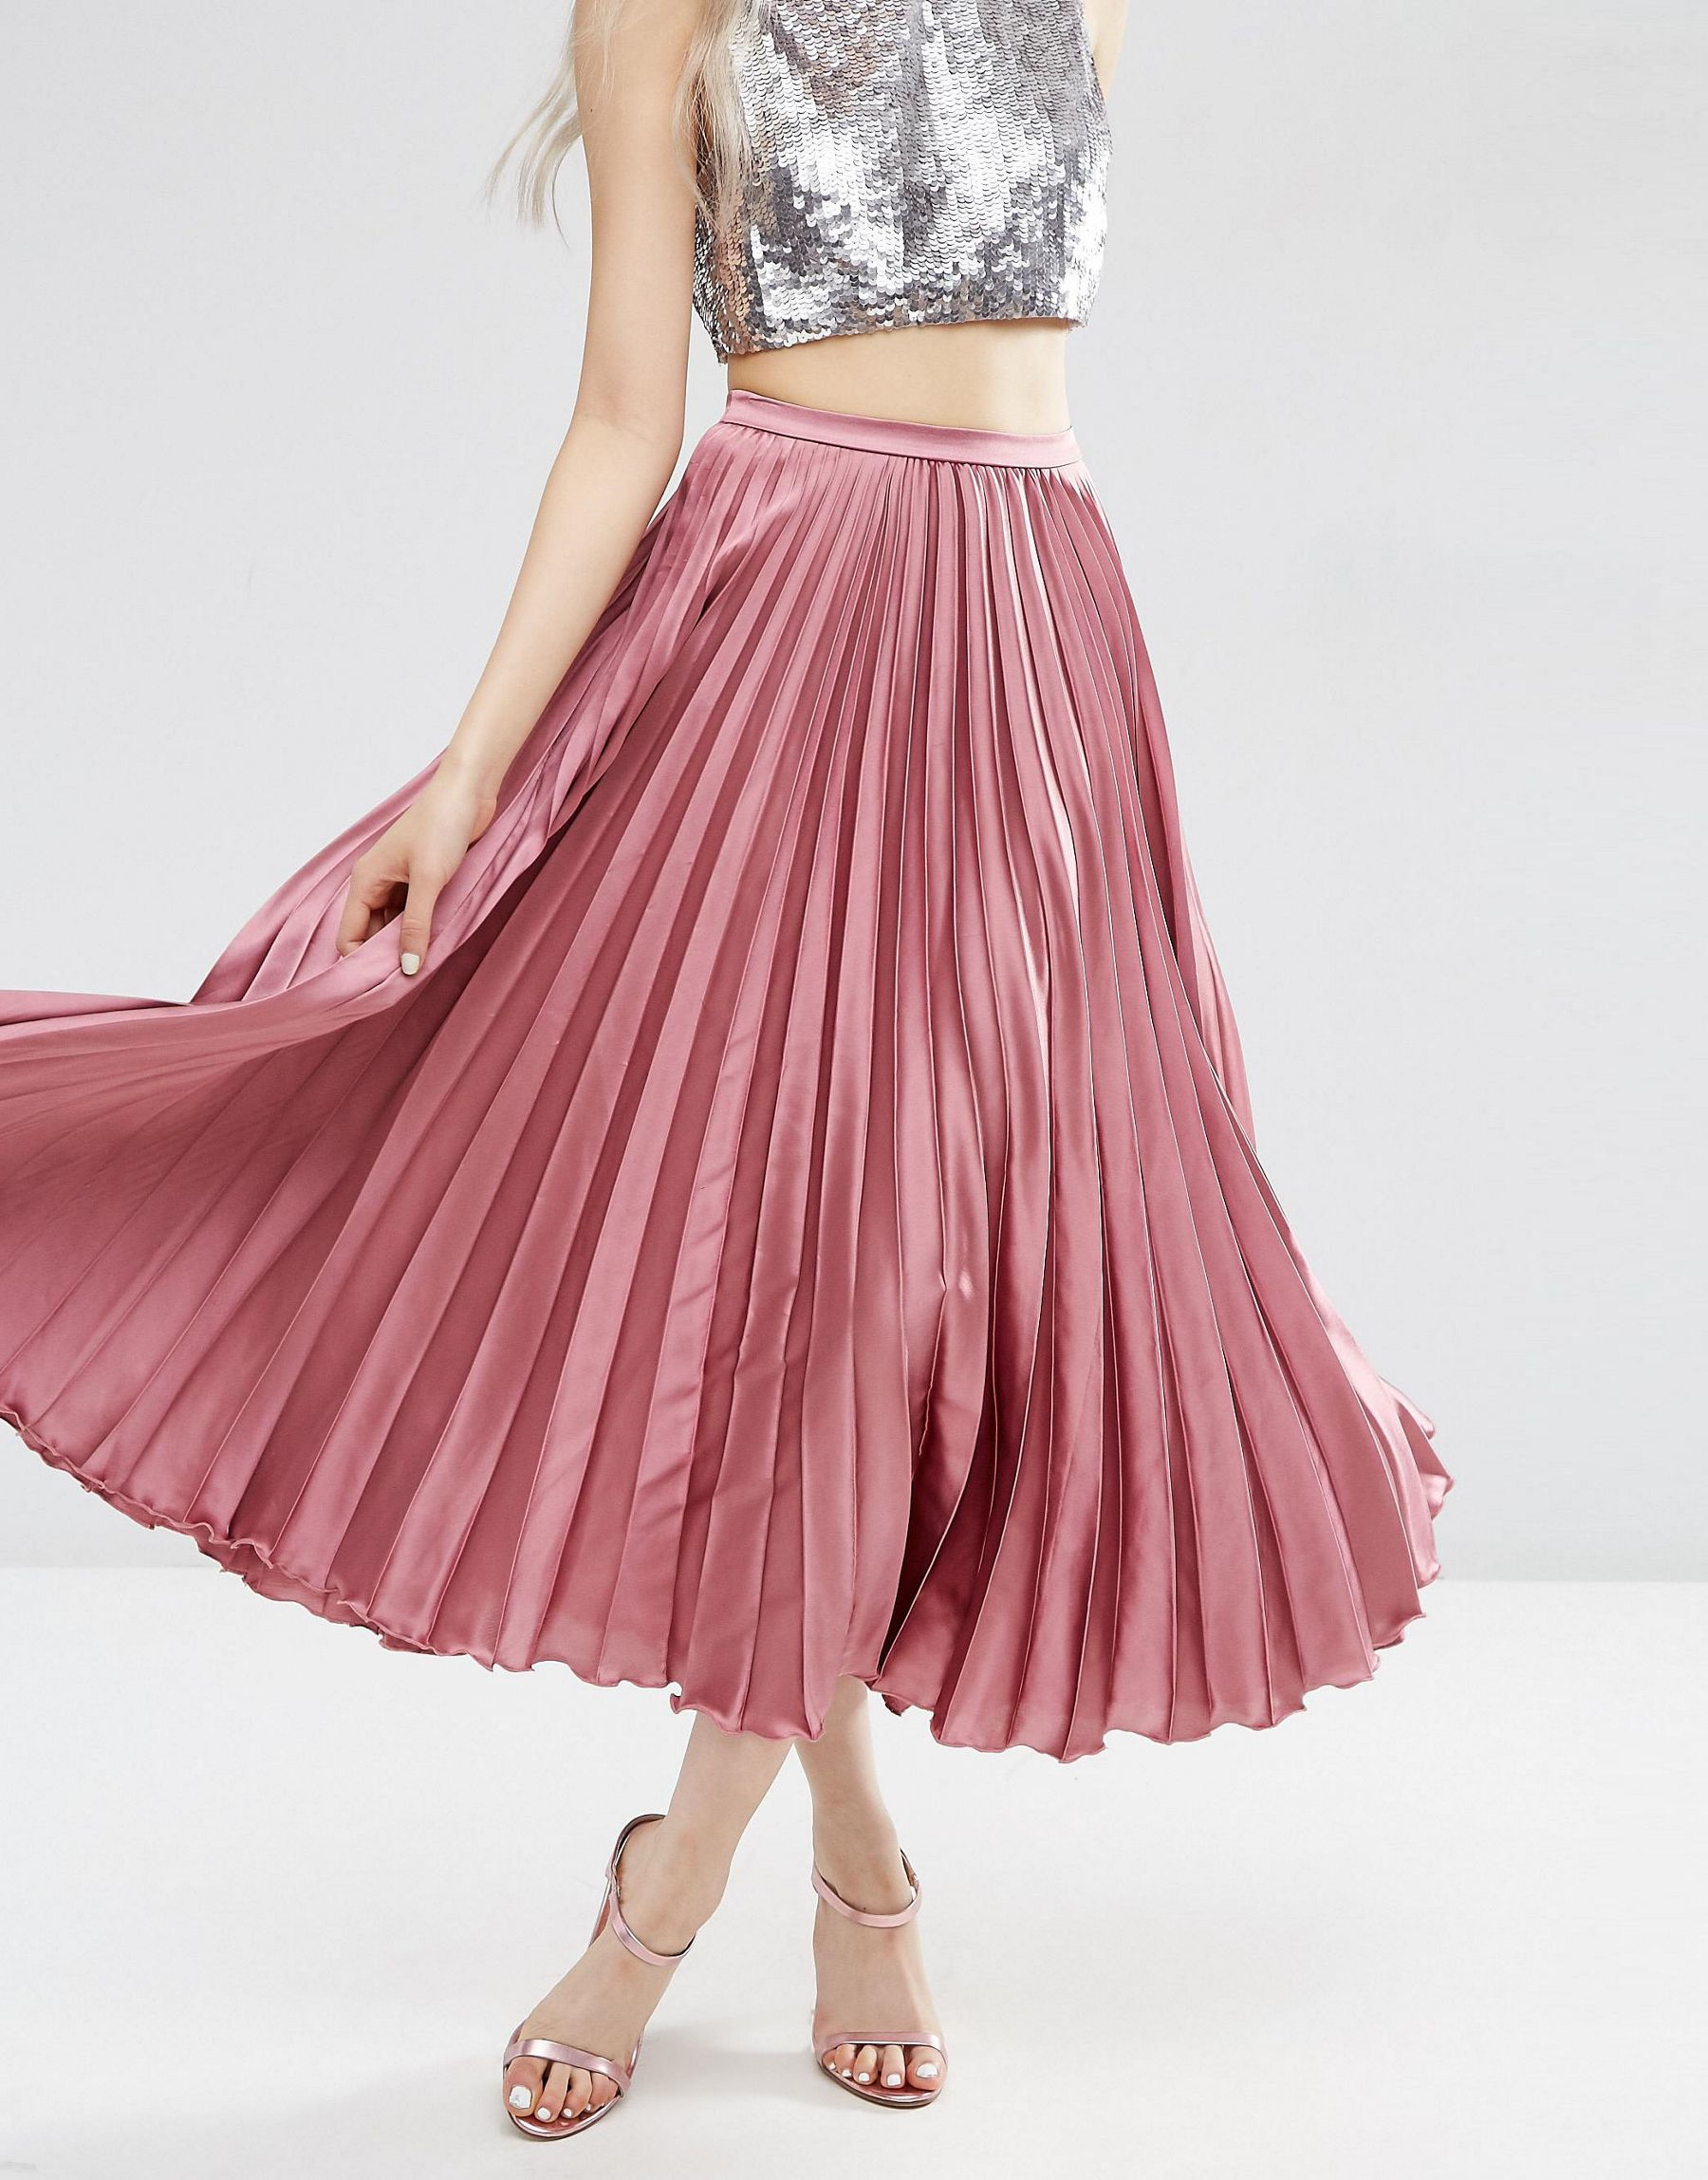 ASOS Midi Skirt In Pleated Satin in Red - Lyst